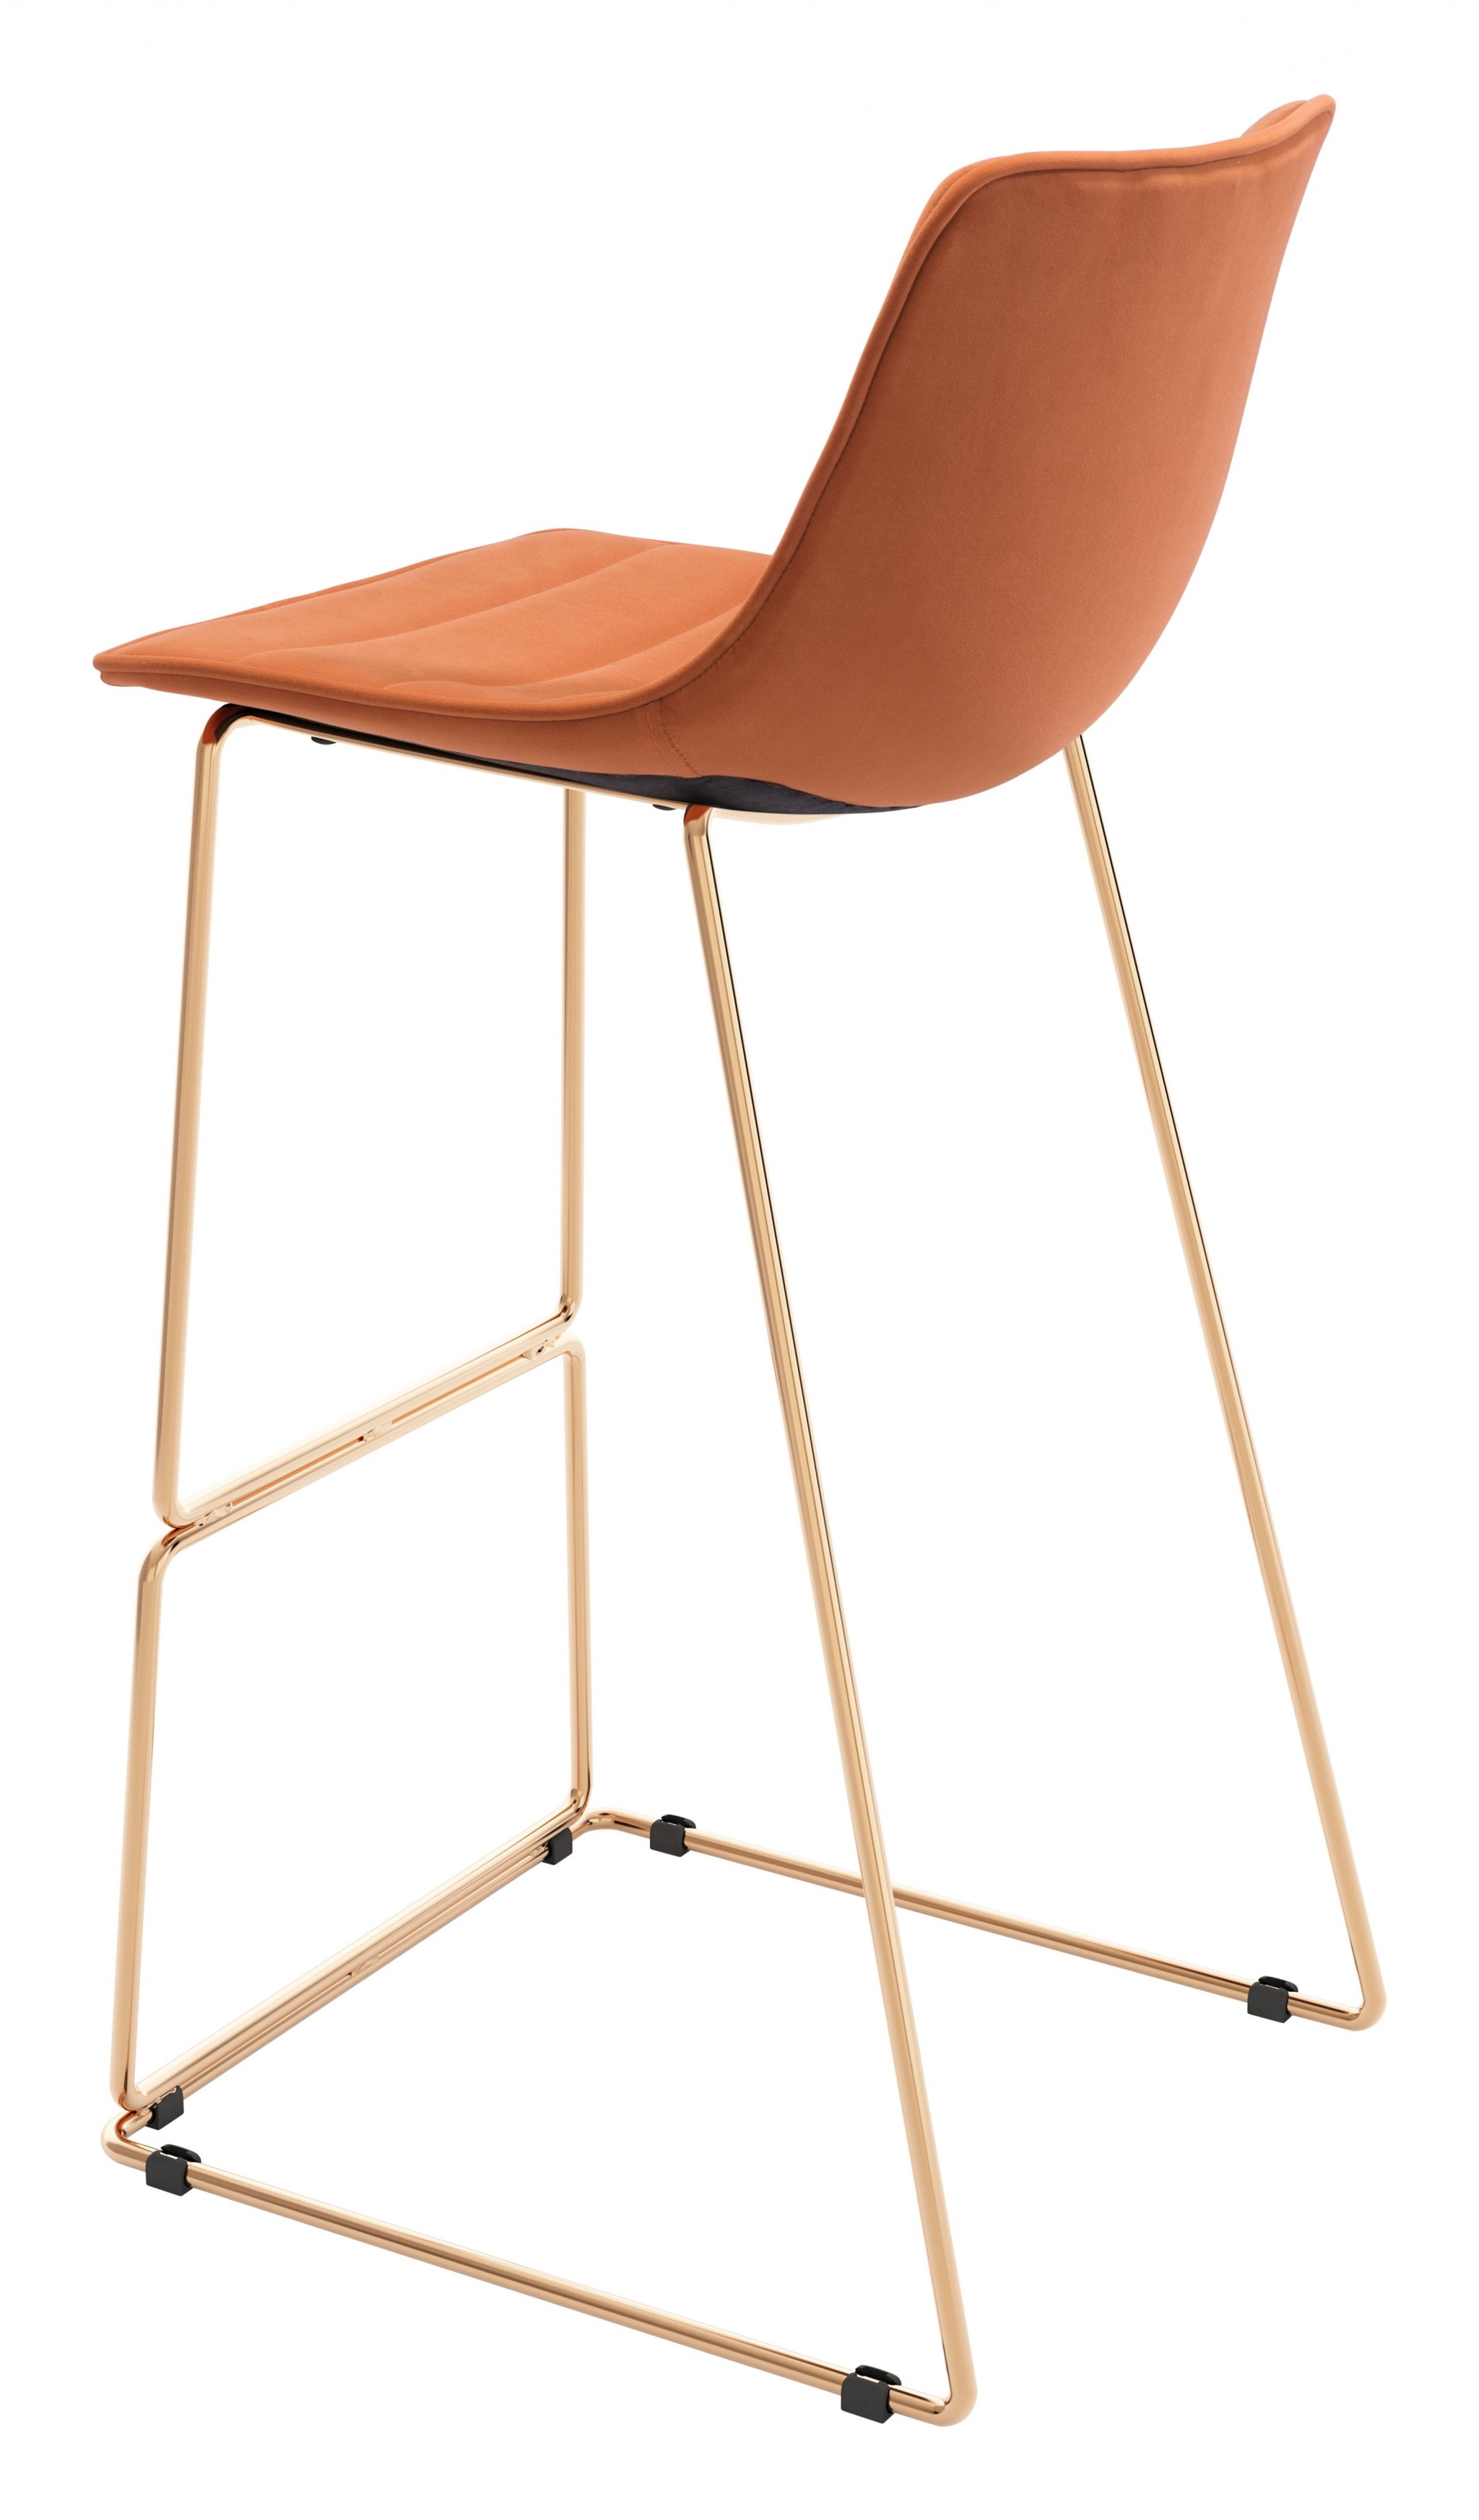 Mod Orange and Gold Bar Height Chair